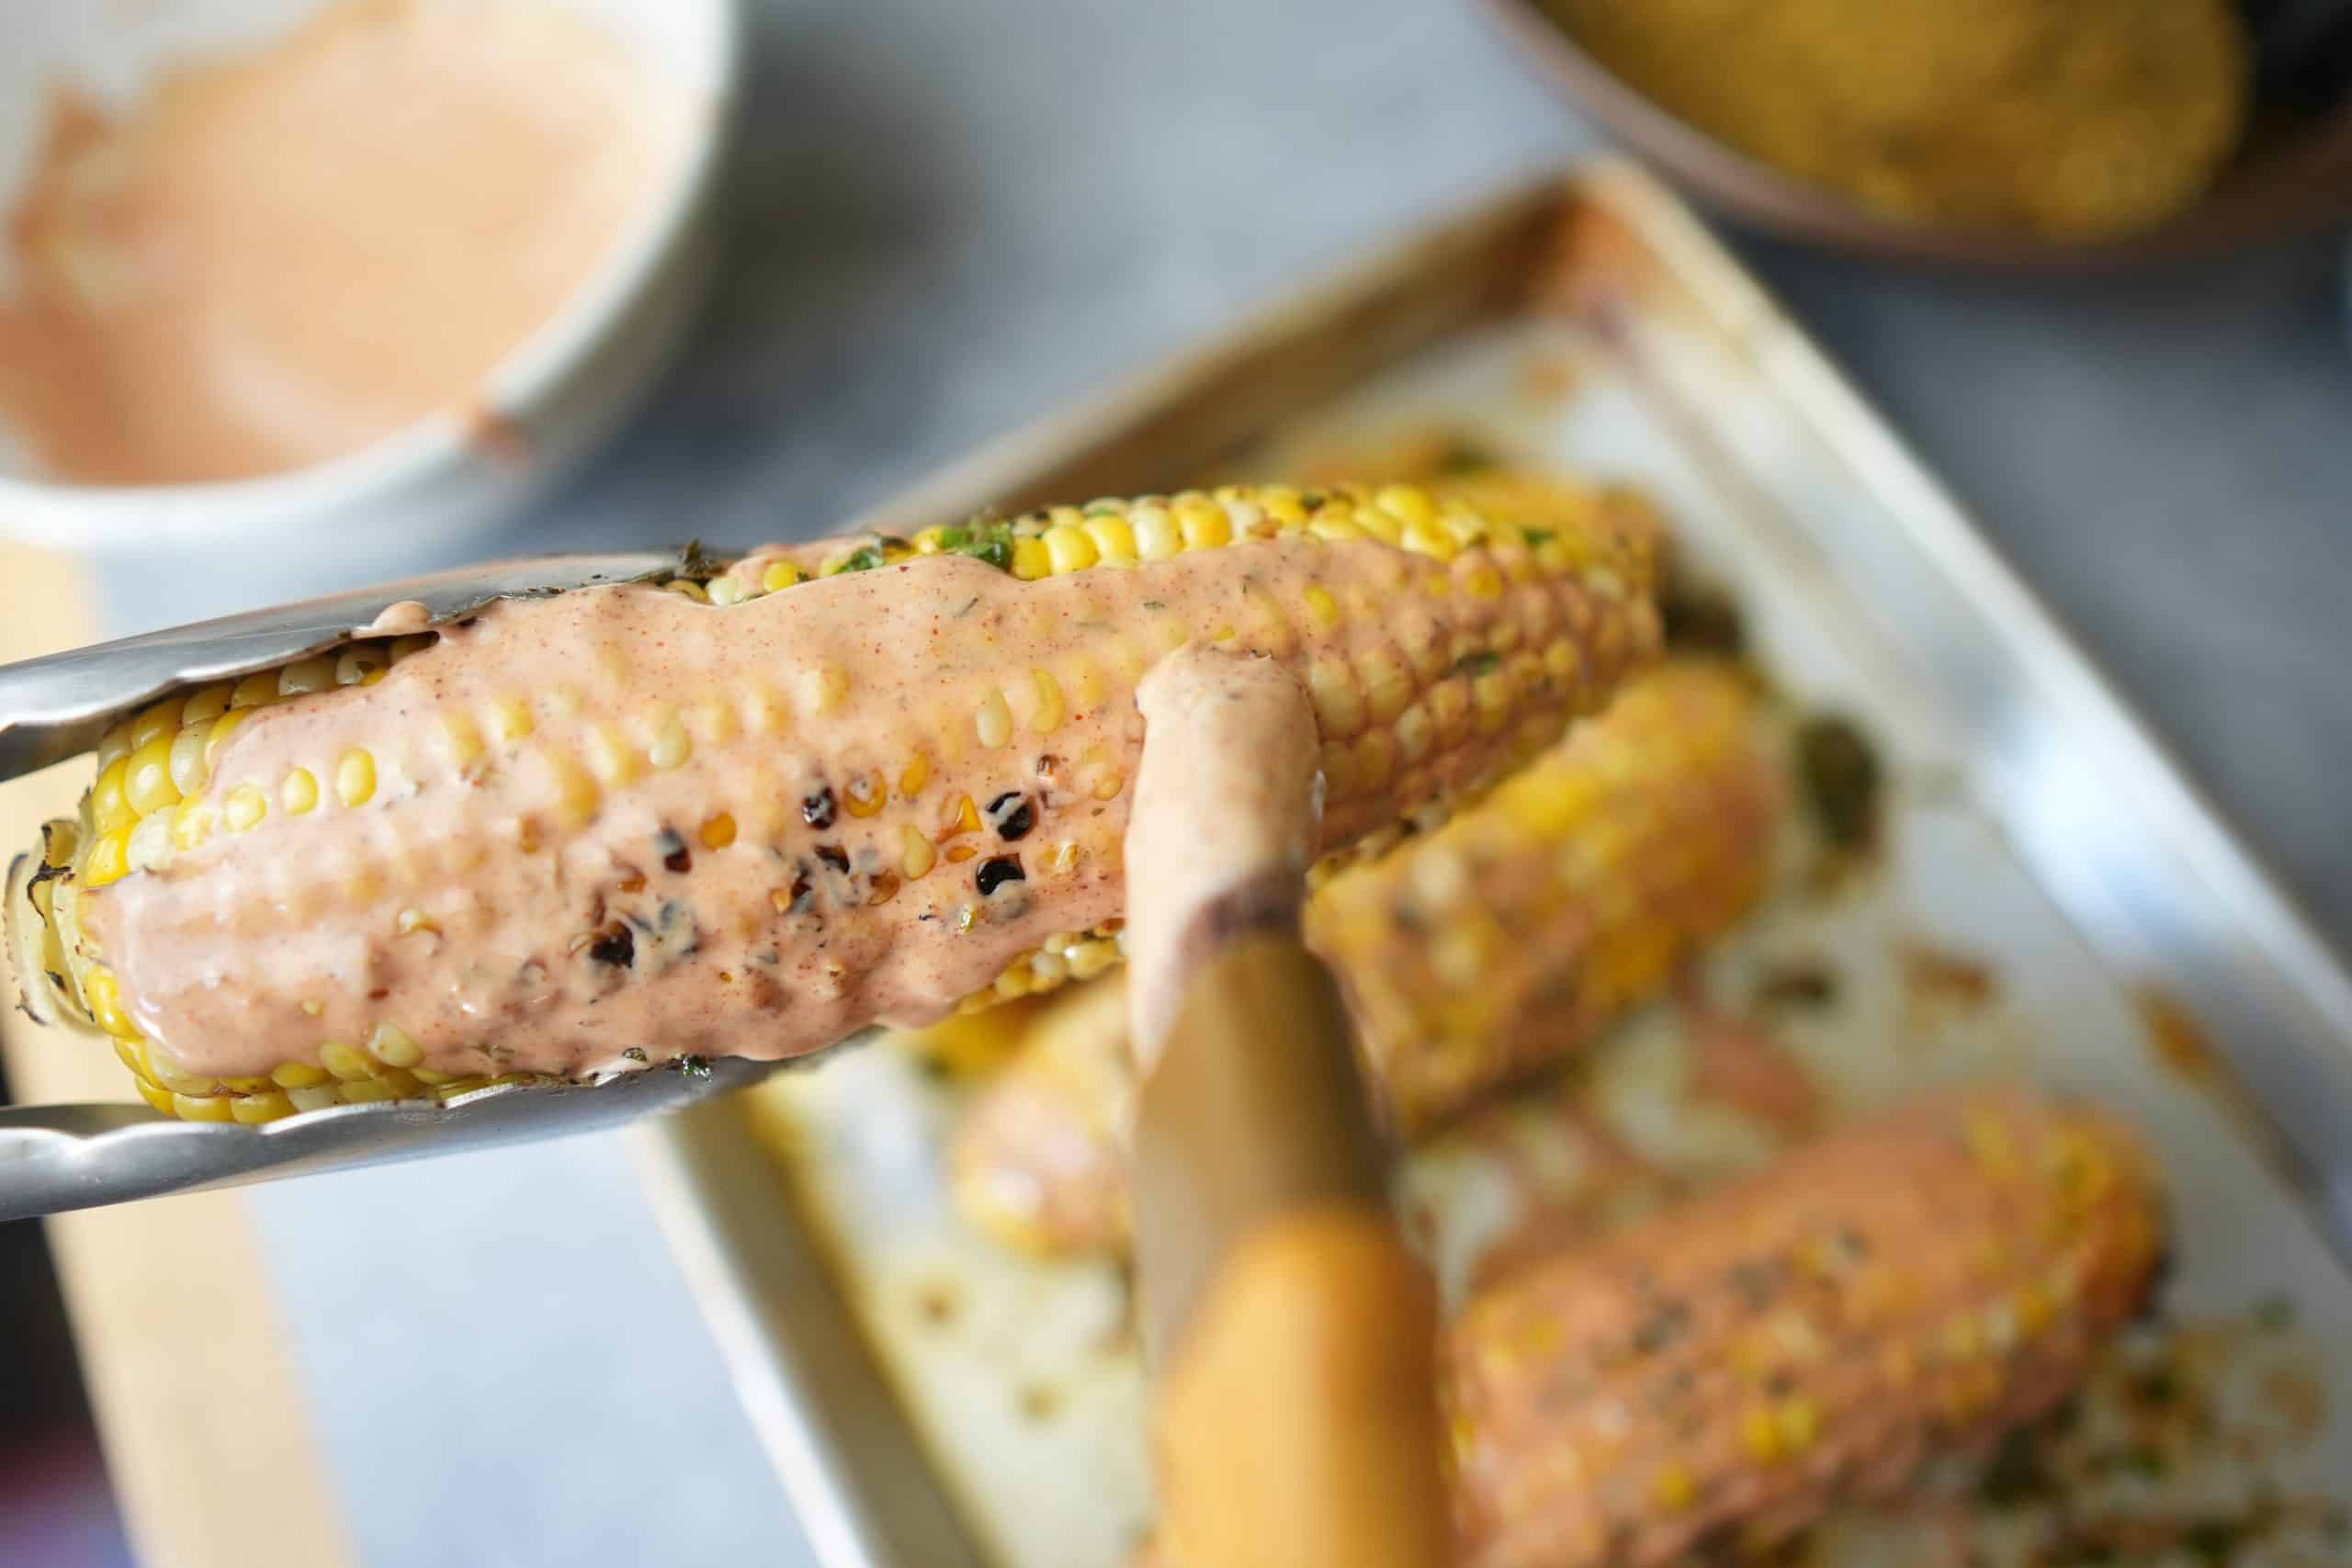 ancho chili mayo being put onto the grilled corn with a pastry brush.